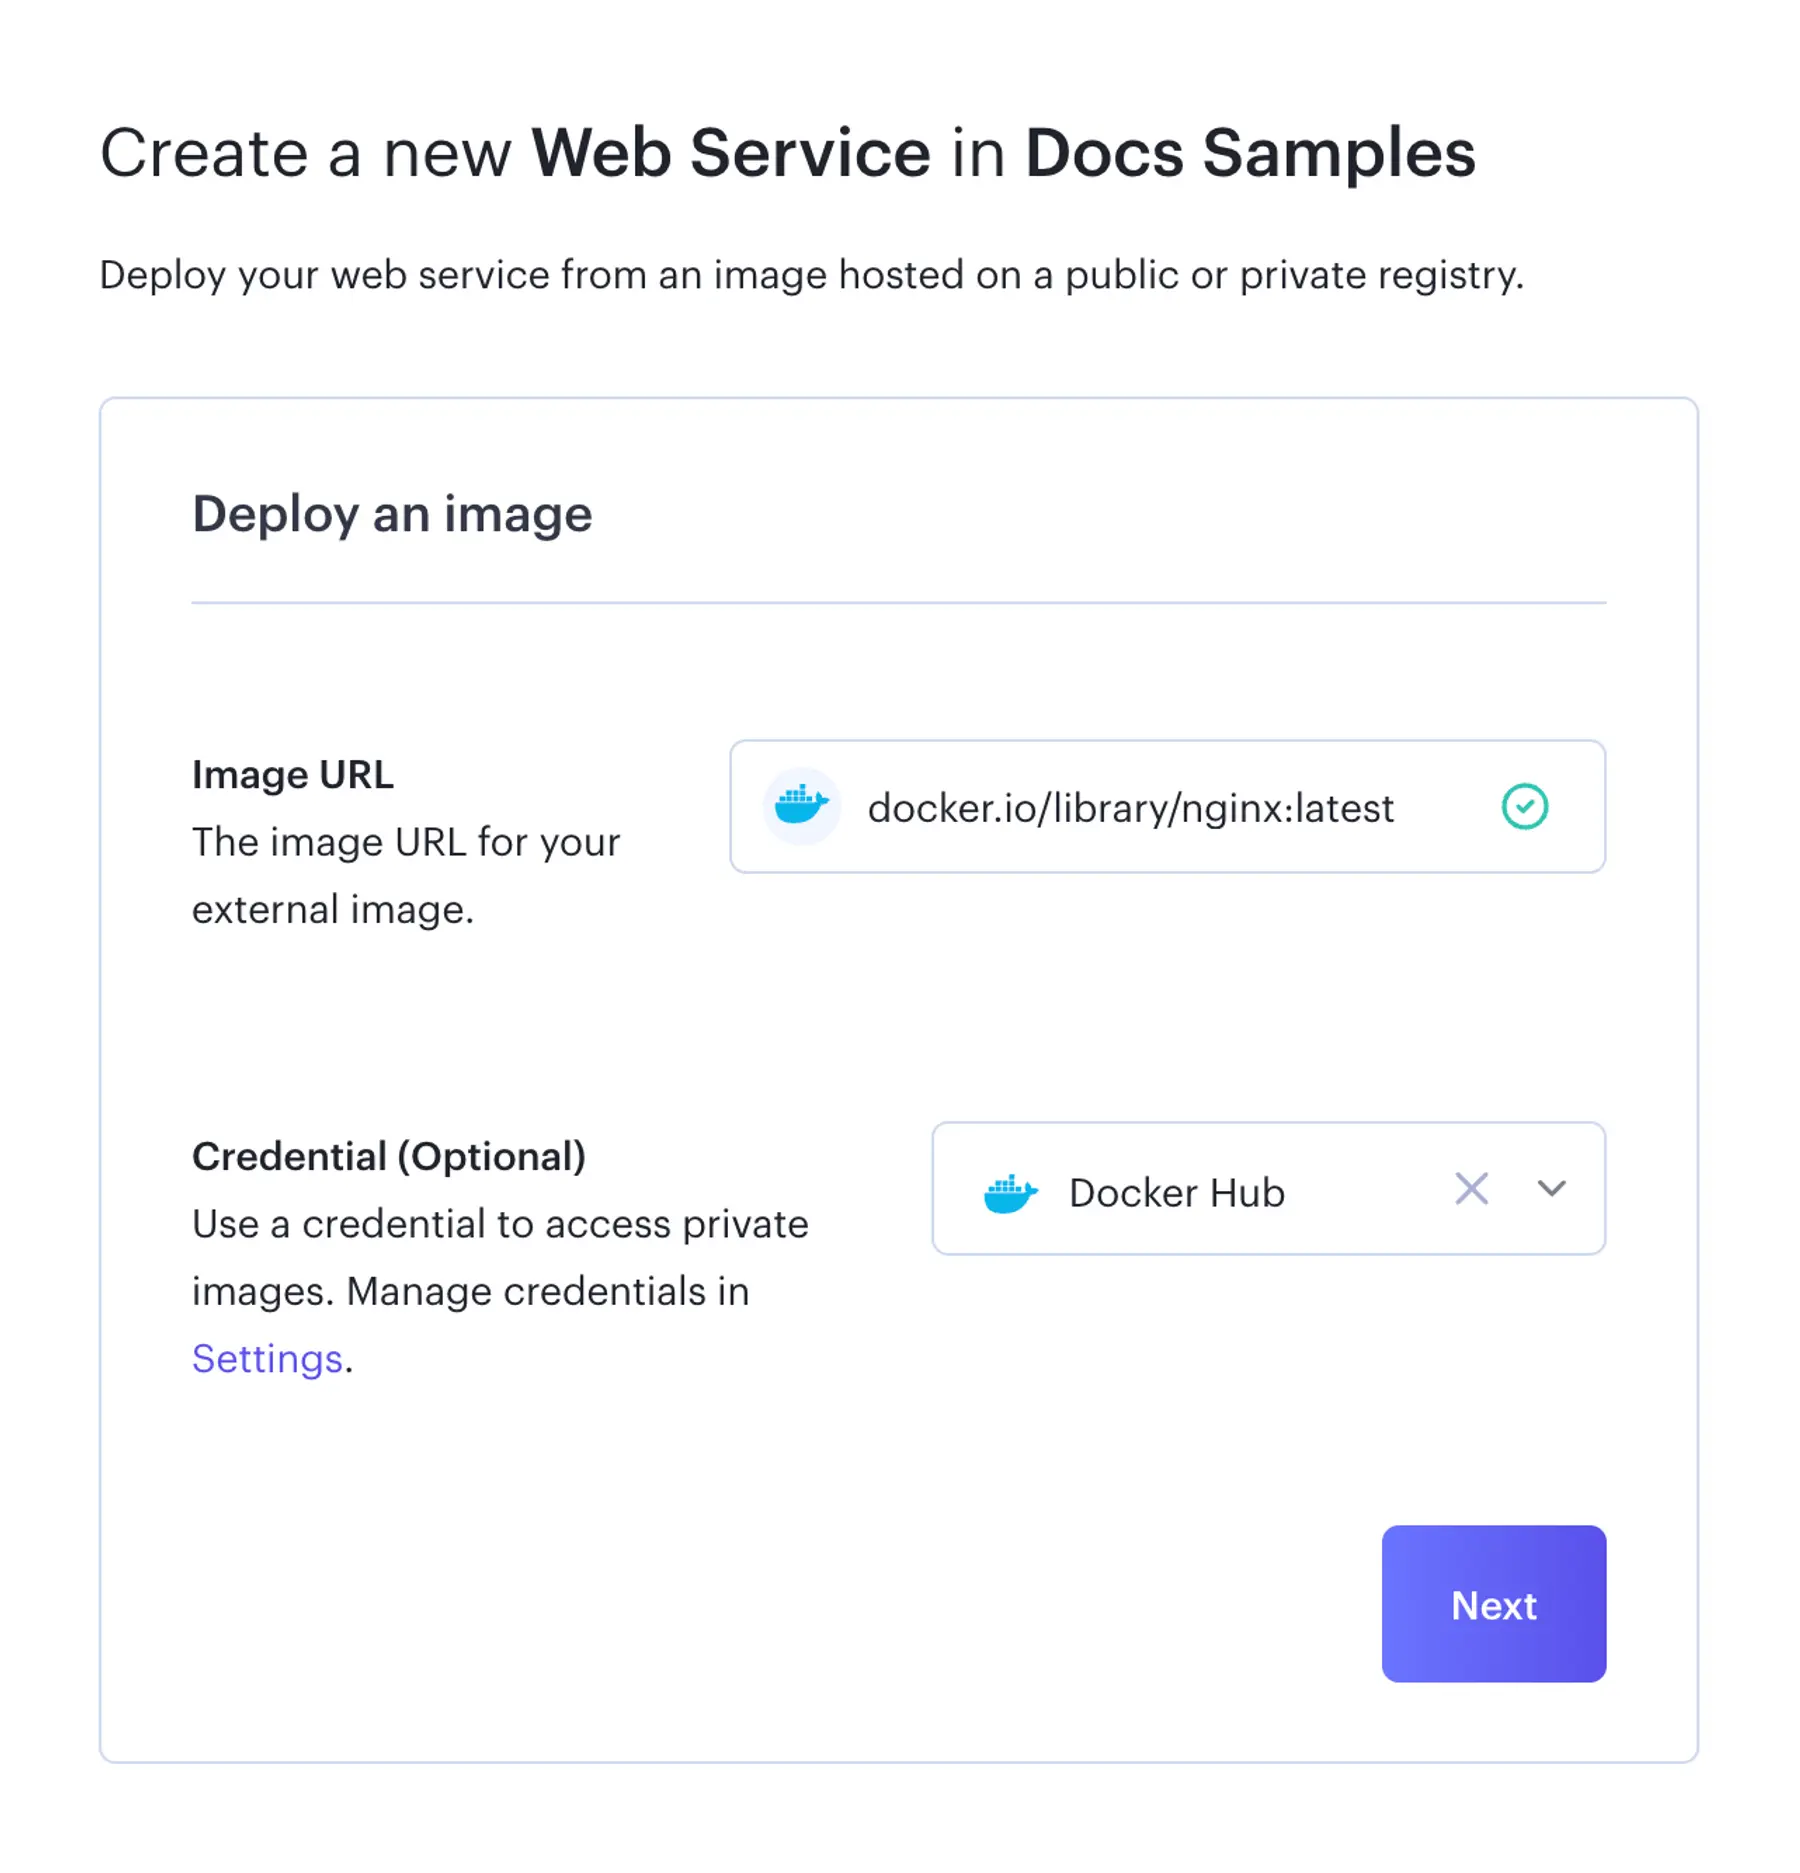 UI for specifying a Docker image URL and credentials